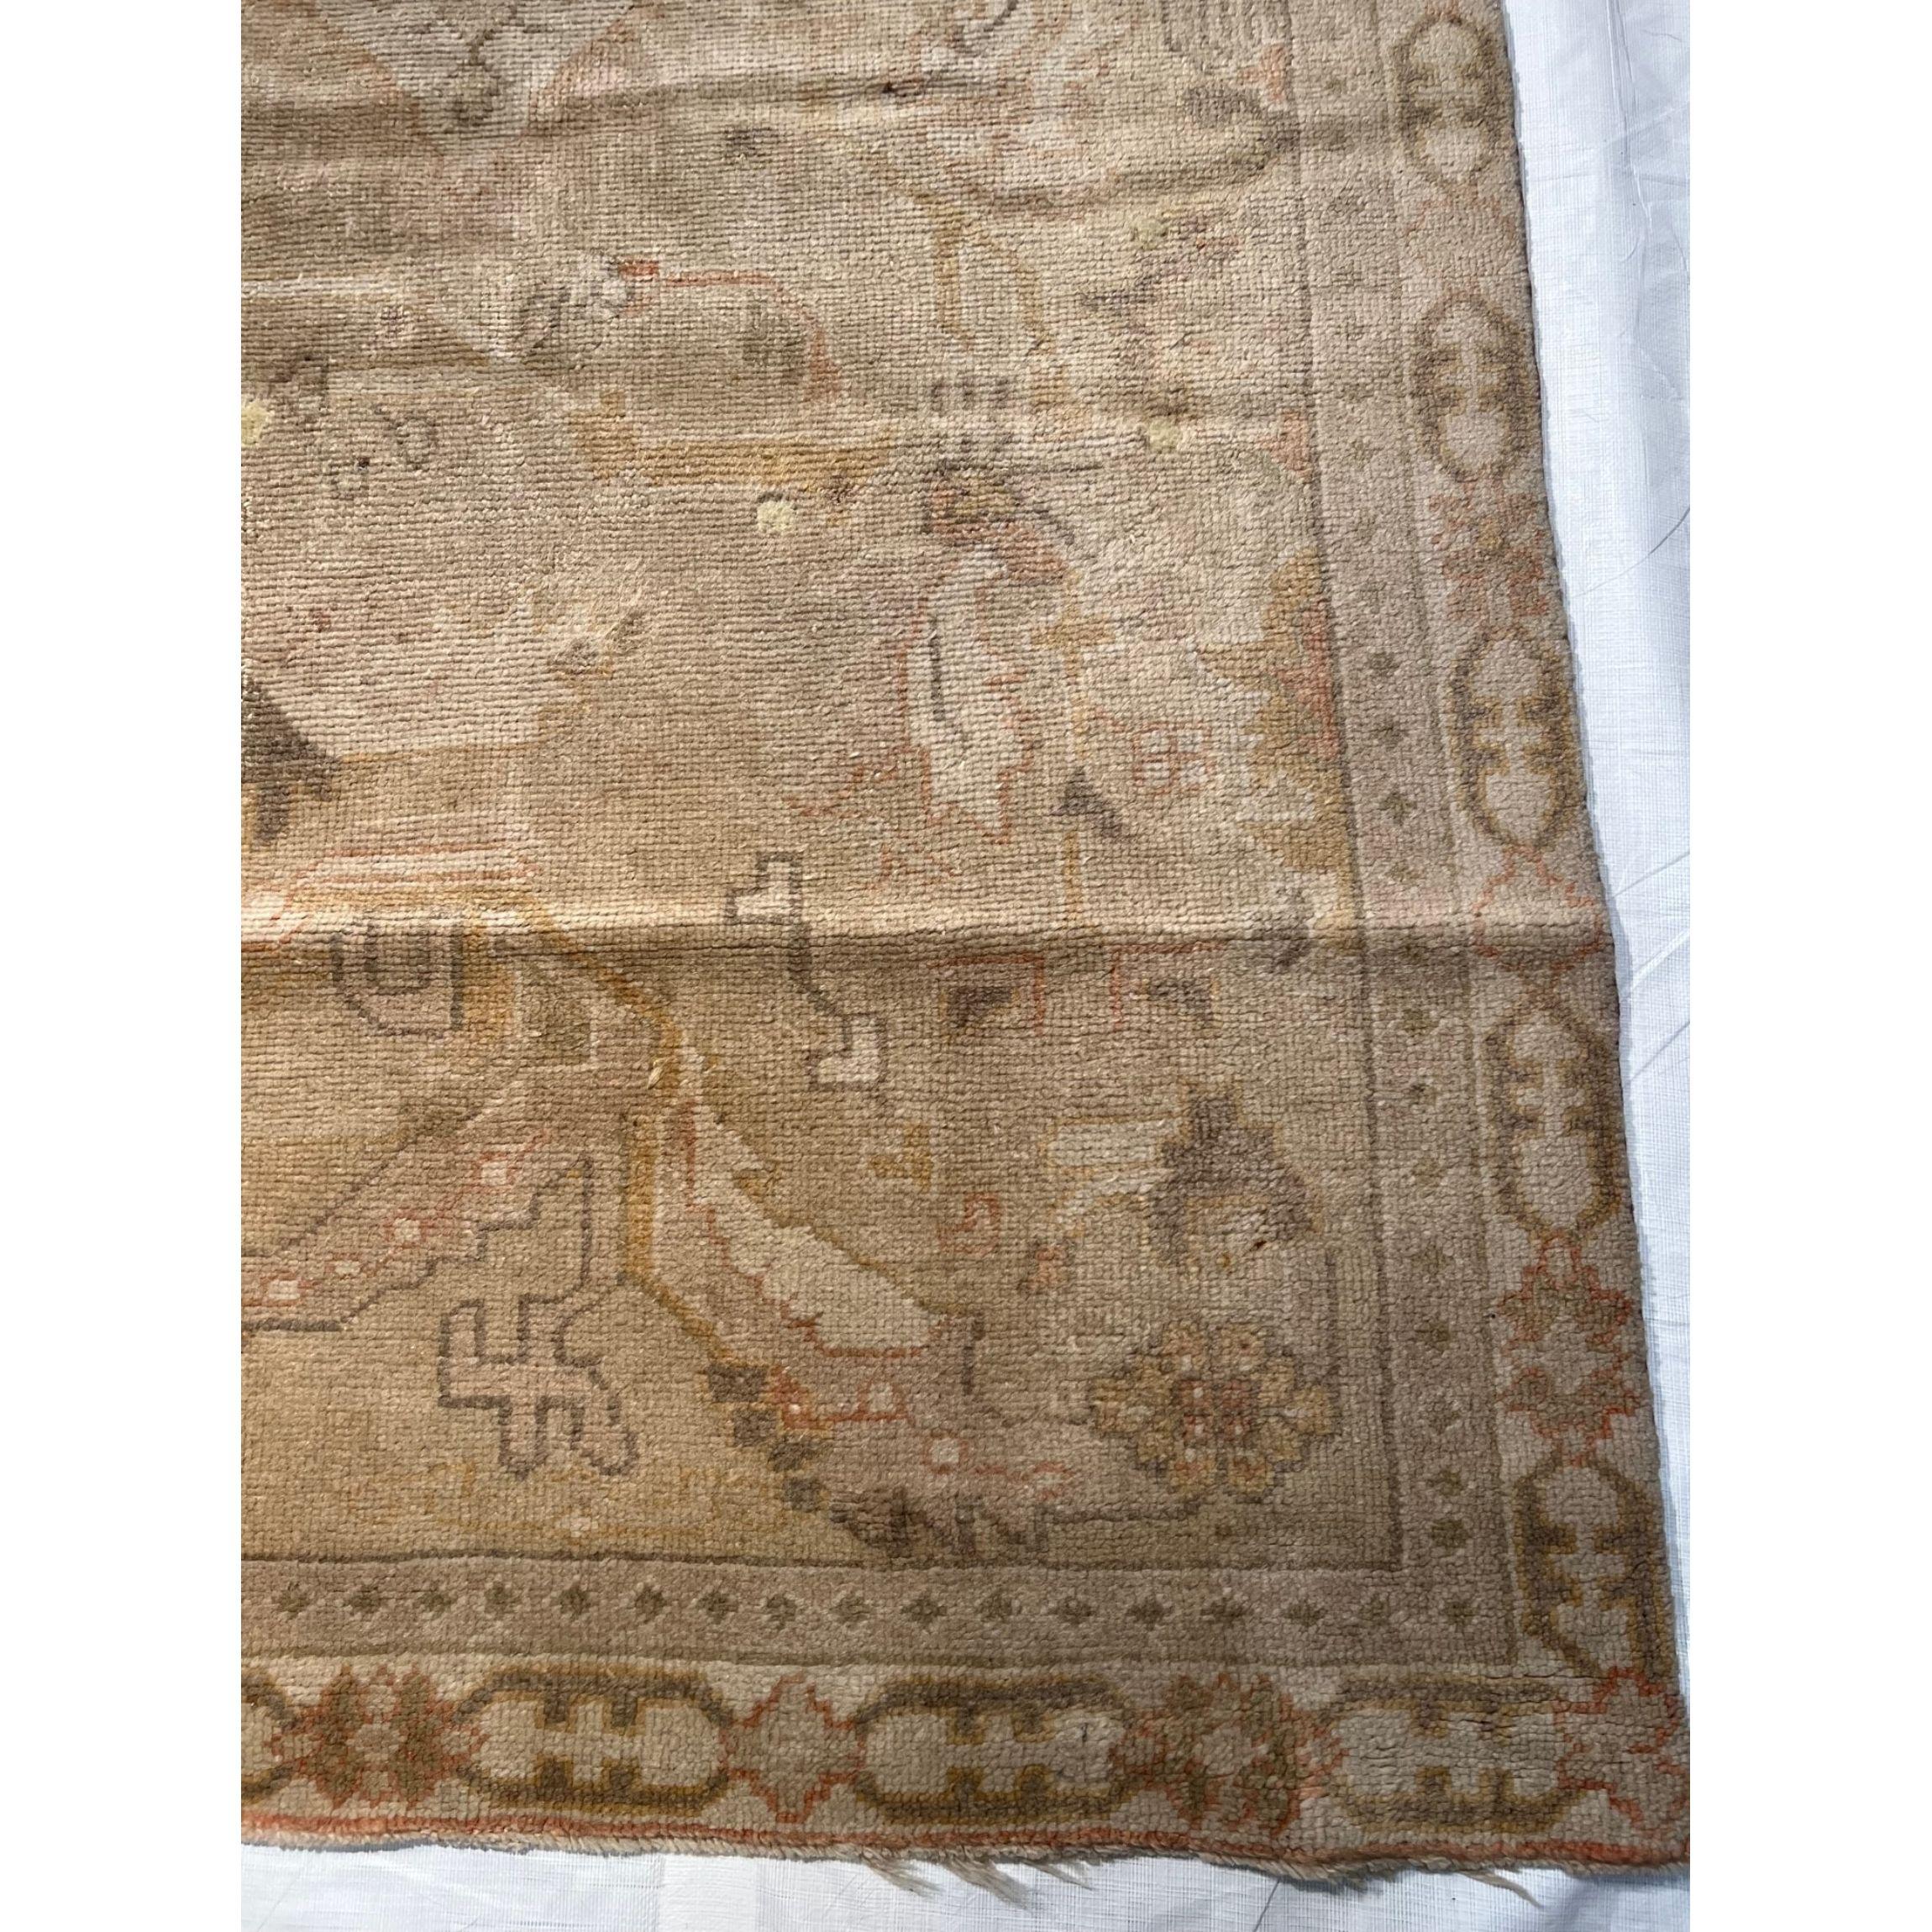 Antique Oushak Rug 11.10x7.7 In Good Condition For Sale In Los Angeles, US